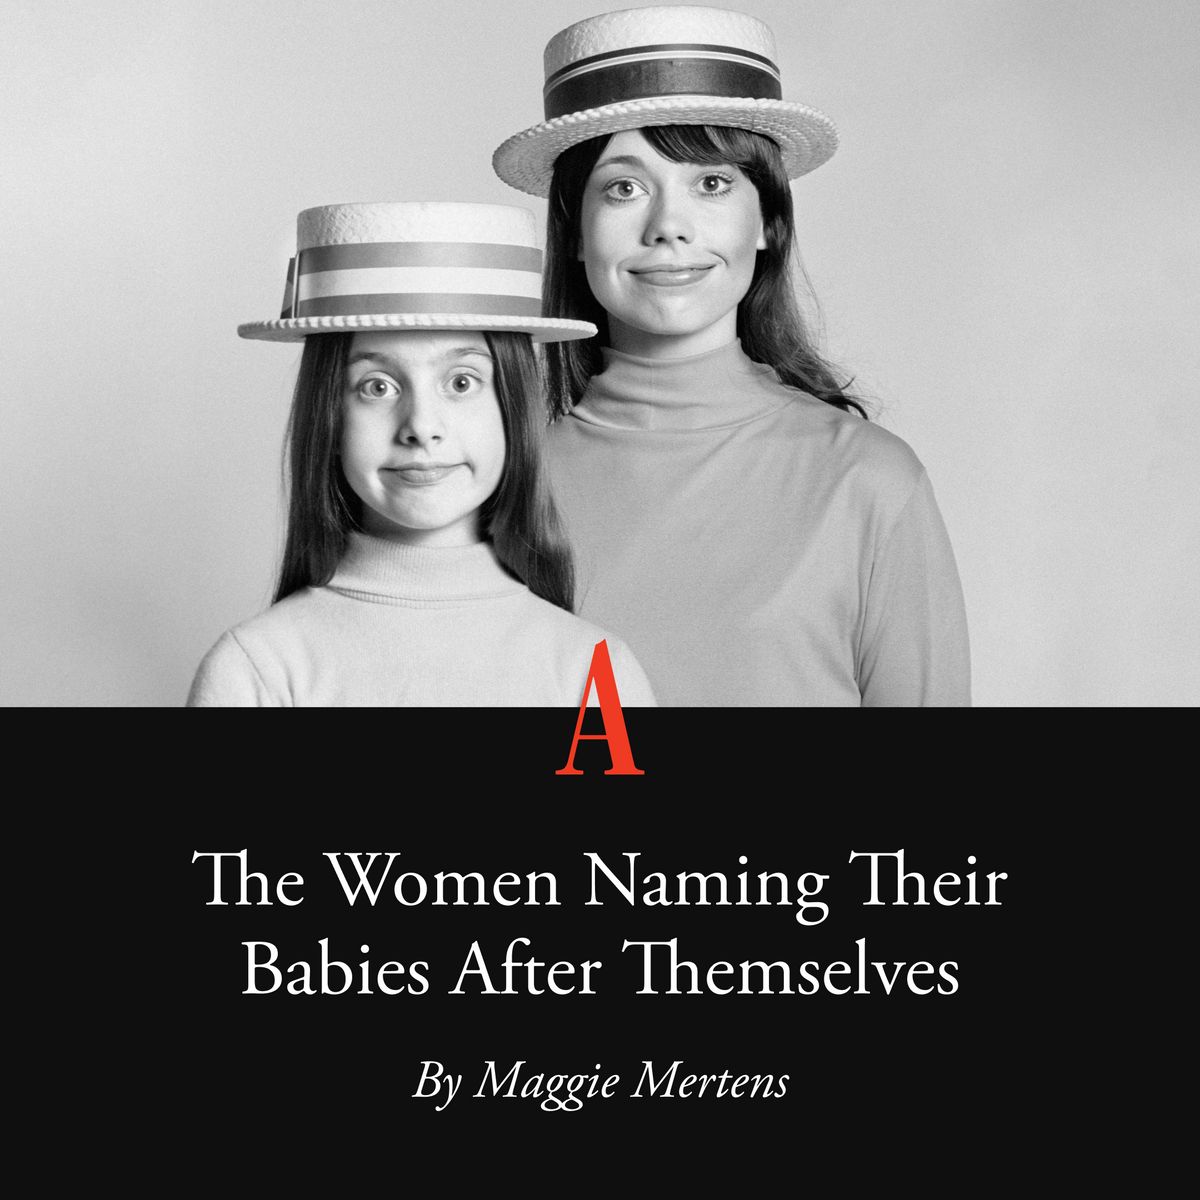 Naming a child after her mother seems radical. But some women are turning that idea on its head. @maggiejmertens reported in 2022: theatln.tc/qlefCjW3